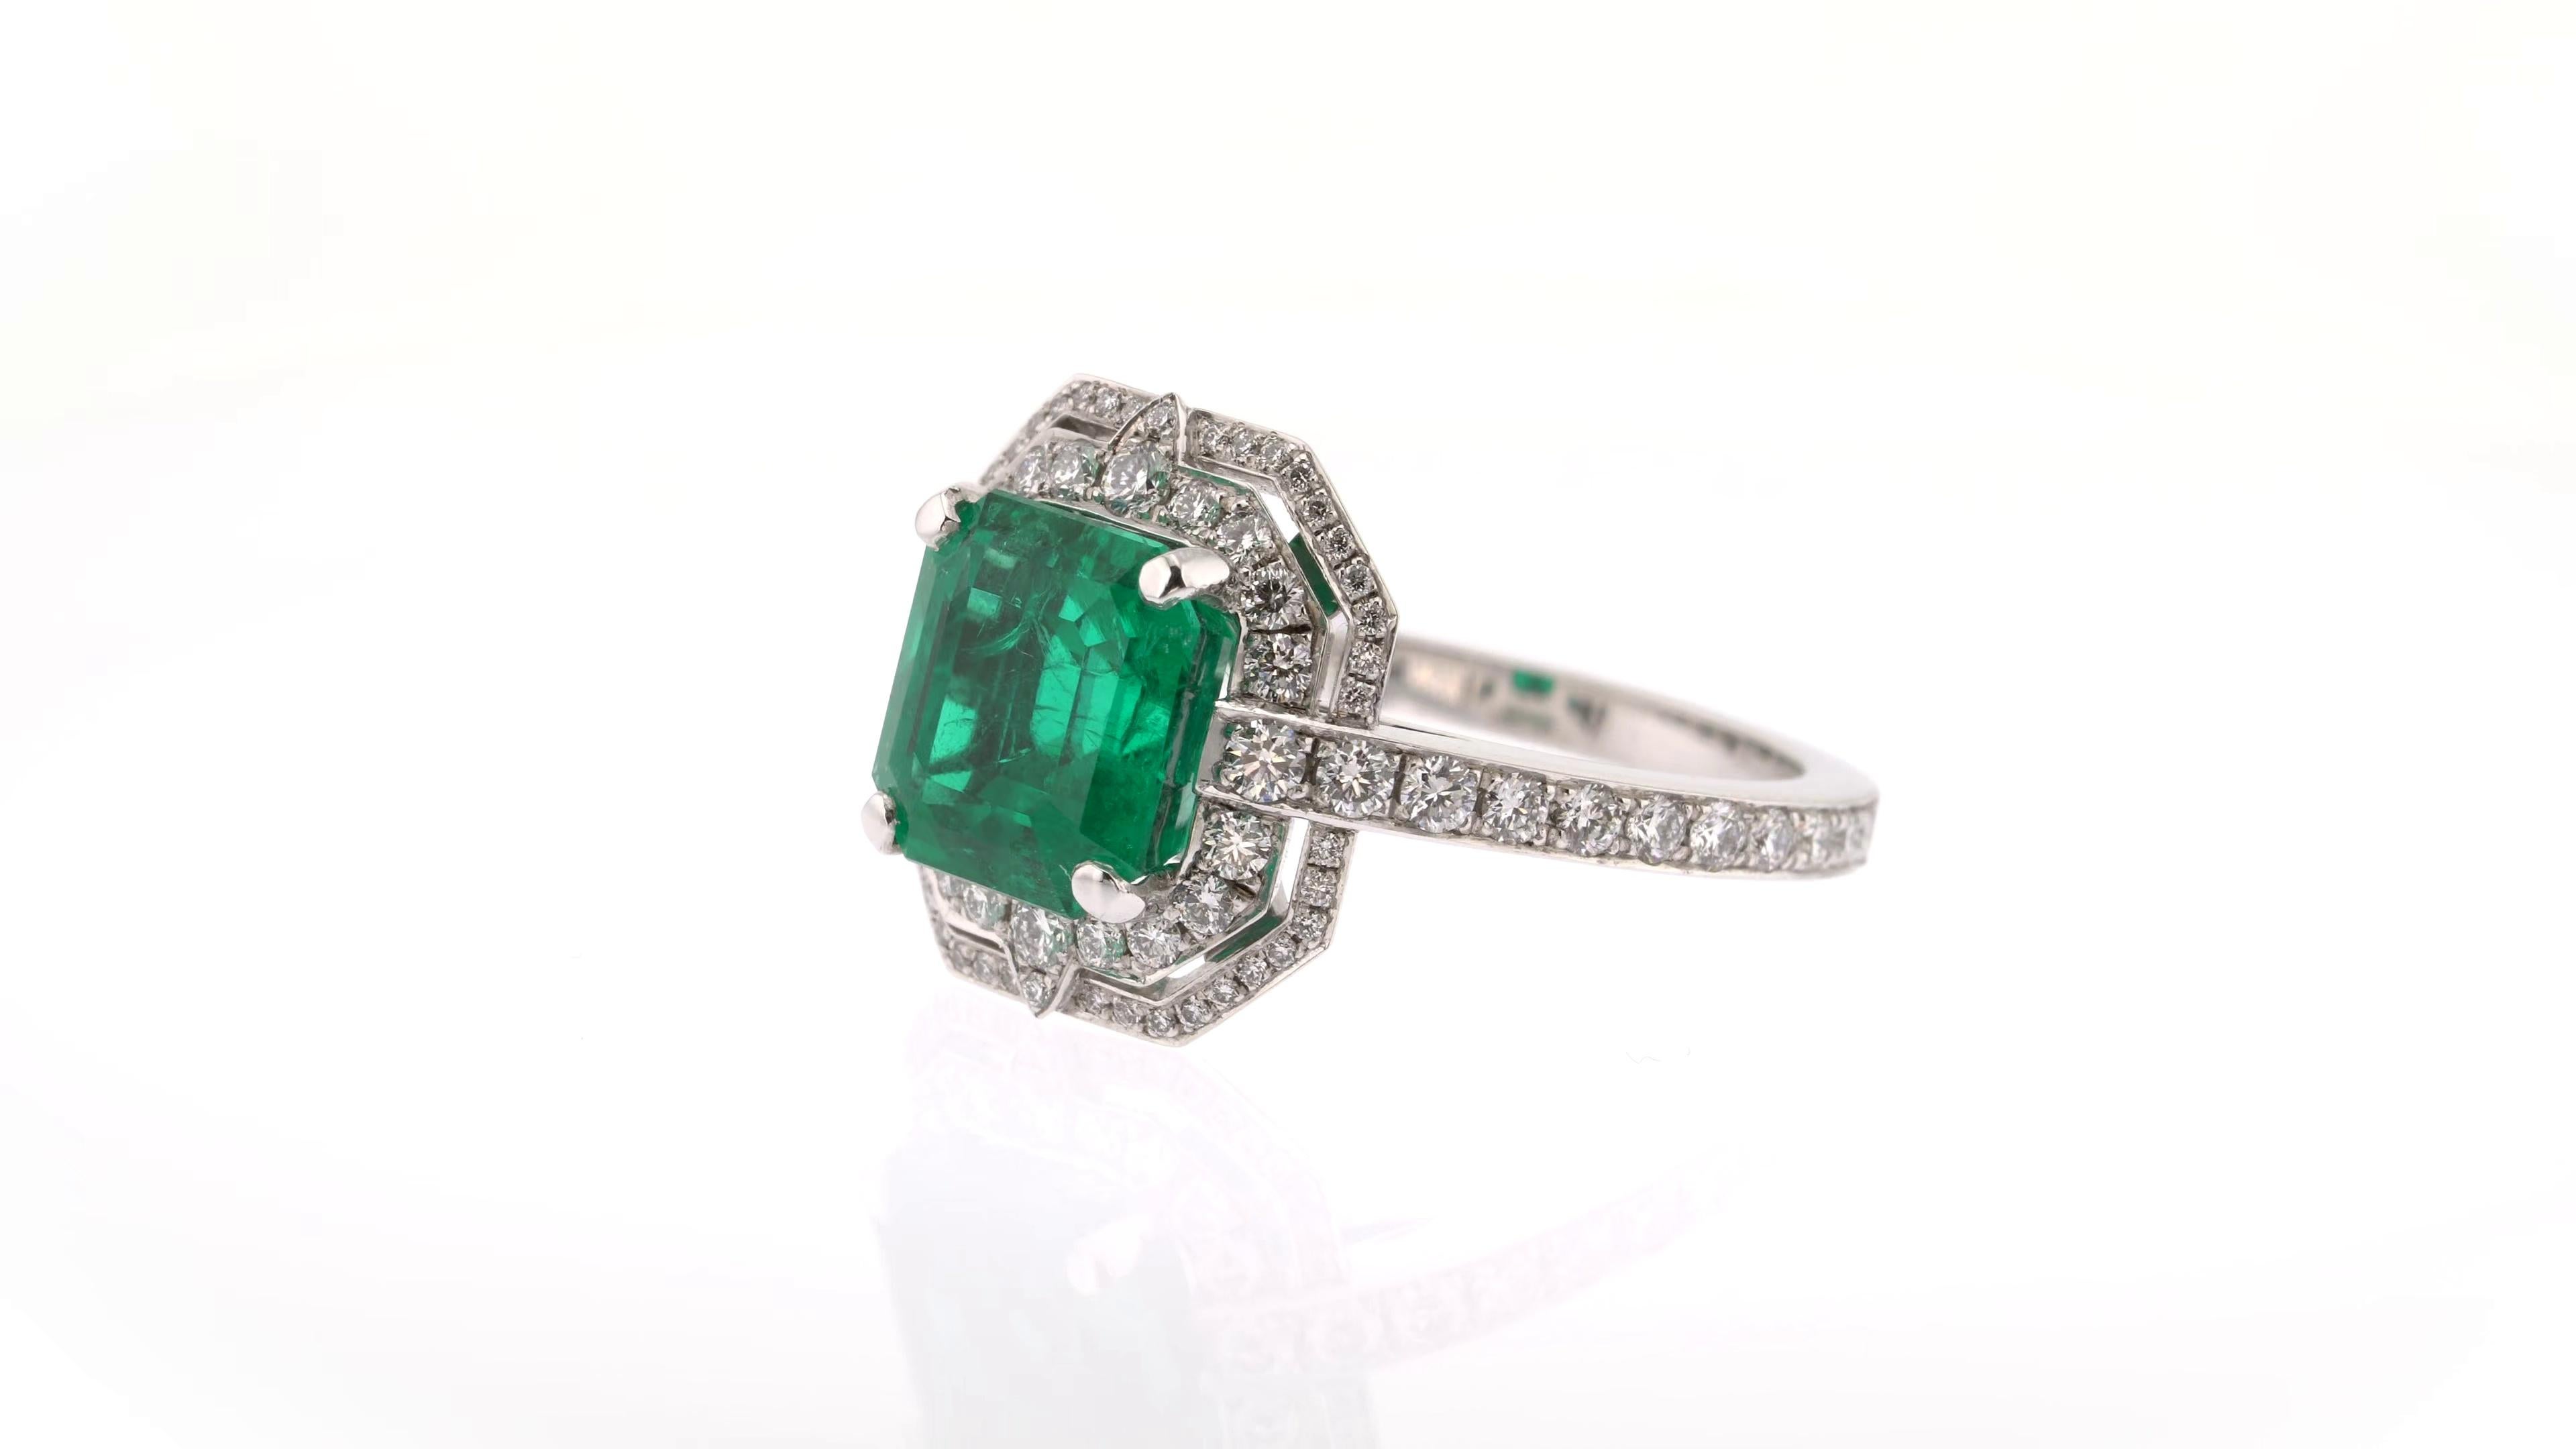 Certified 3.16 Carats Emerald Ring with White Diamonds Halo in Art Deco Style For Sale 1